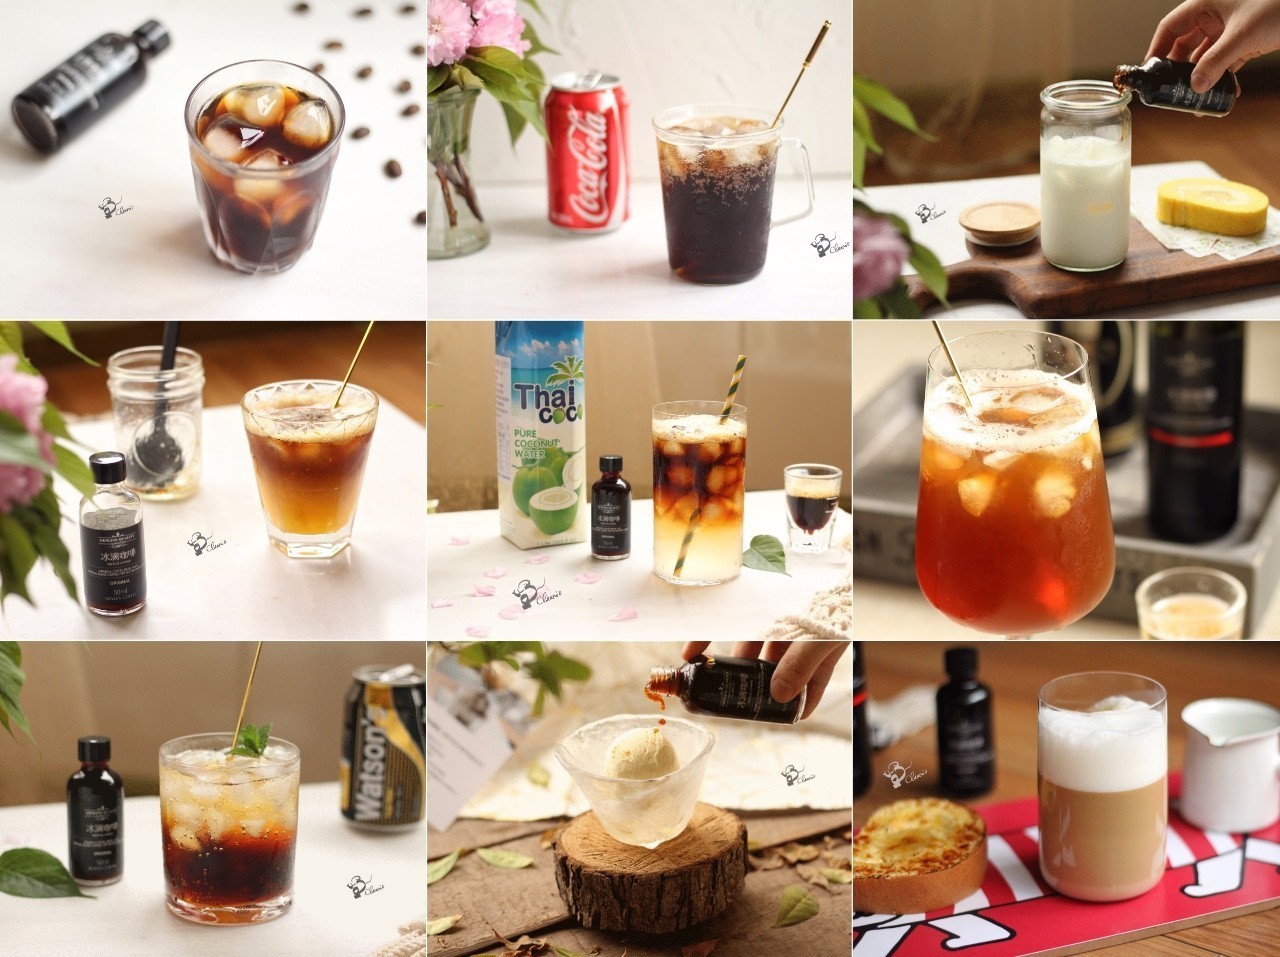 Recommended | N kinds of coffee ice drink, with which rookies can easily make it.